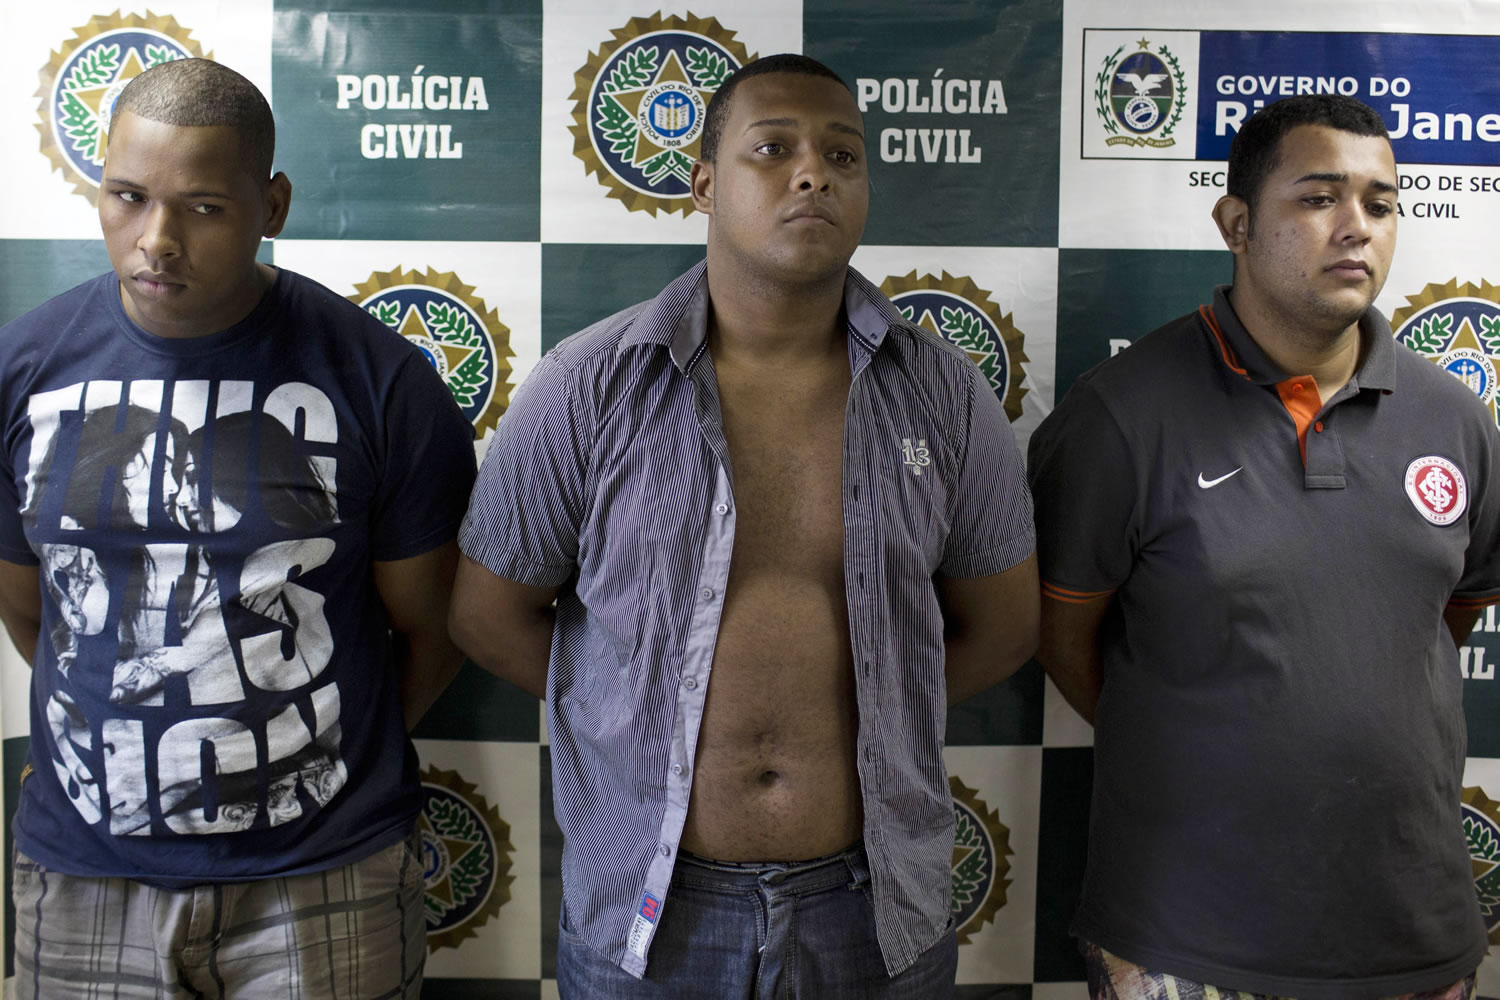 Suspects Wallace Aparecido Souza Silva, from left, Carlos Armando Costa dos Santos and Jonathan Foudakis de Souza are presented to the press at the Special Police Unit for Tourism Support after being arrested for allegedly attacking tourists in Rio de Janeiro, Brazil, on Tuesday.